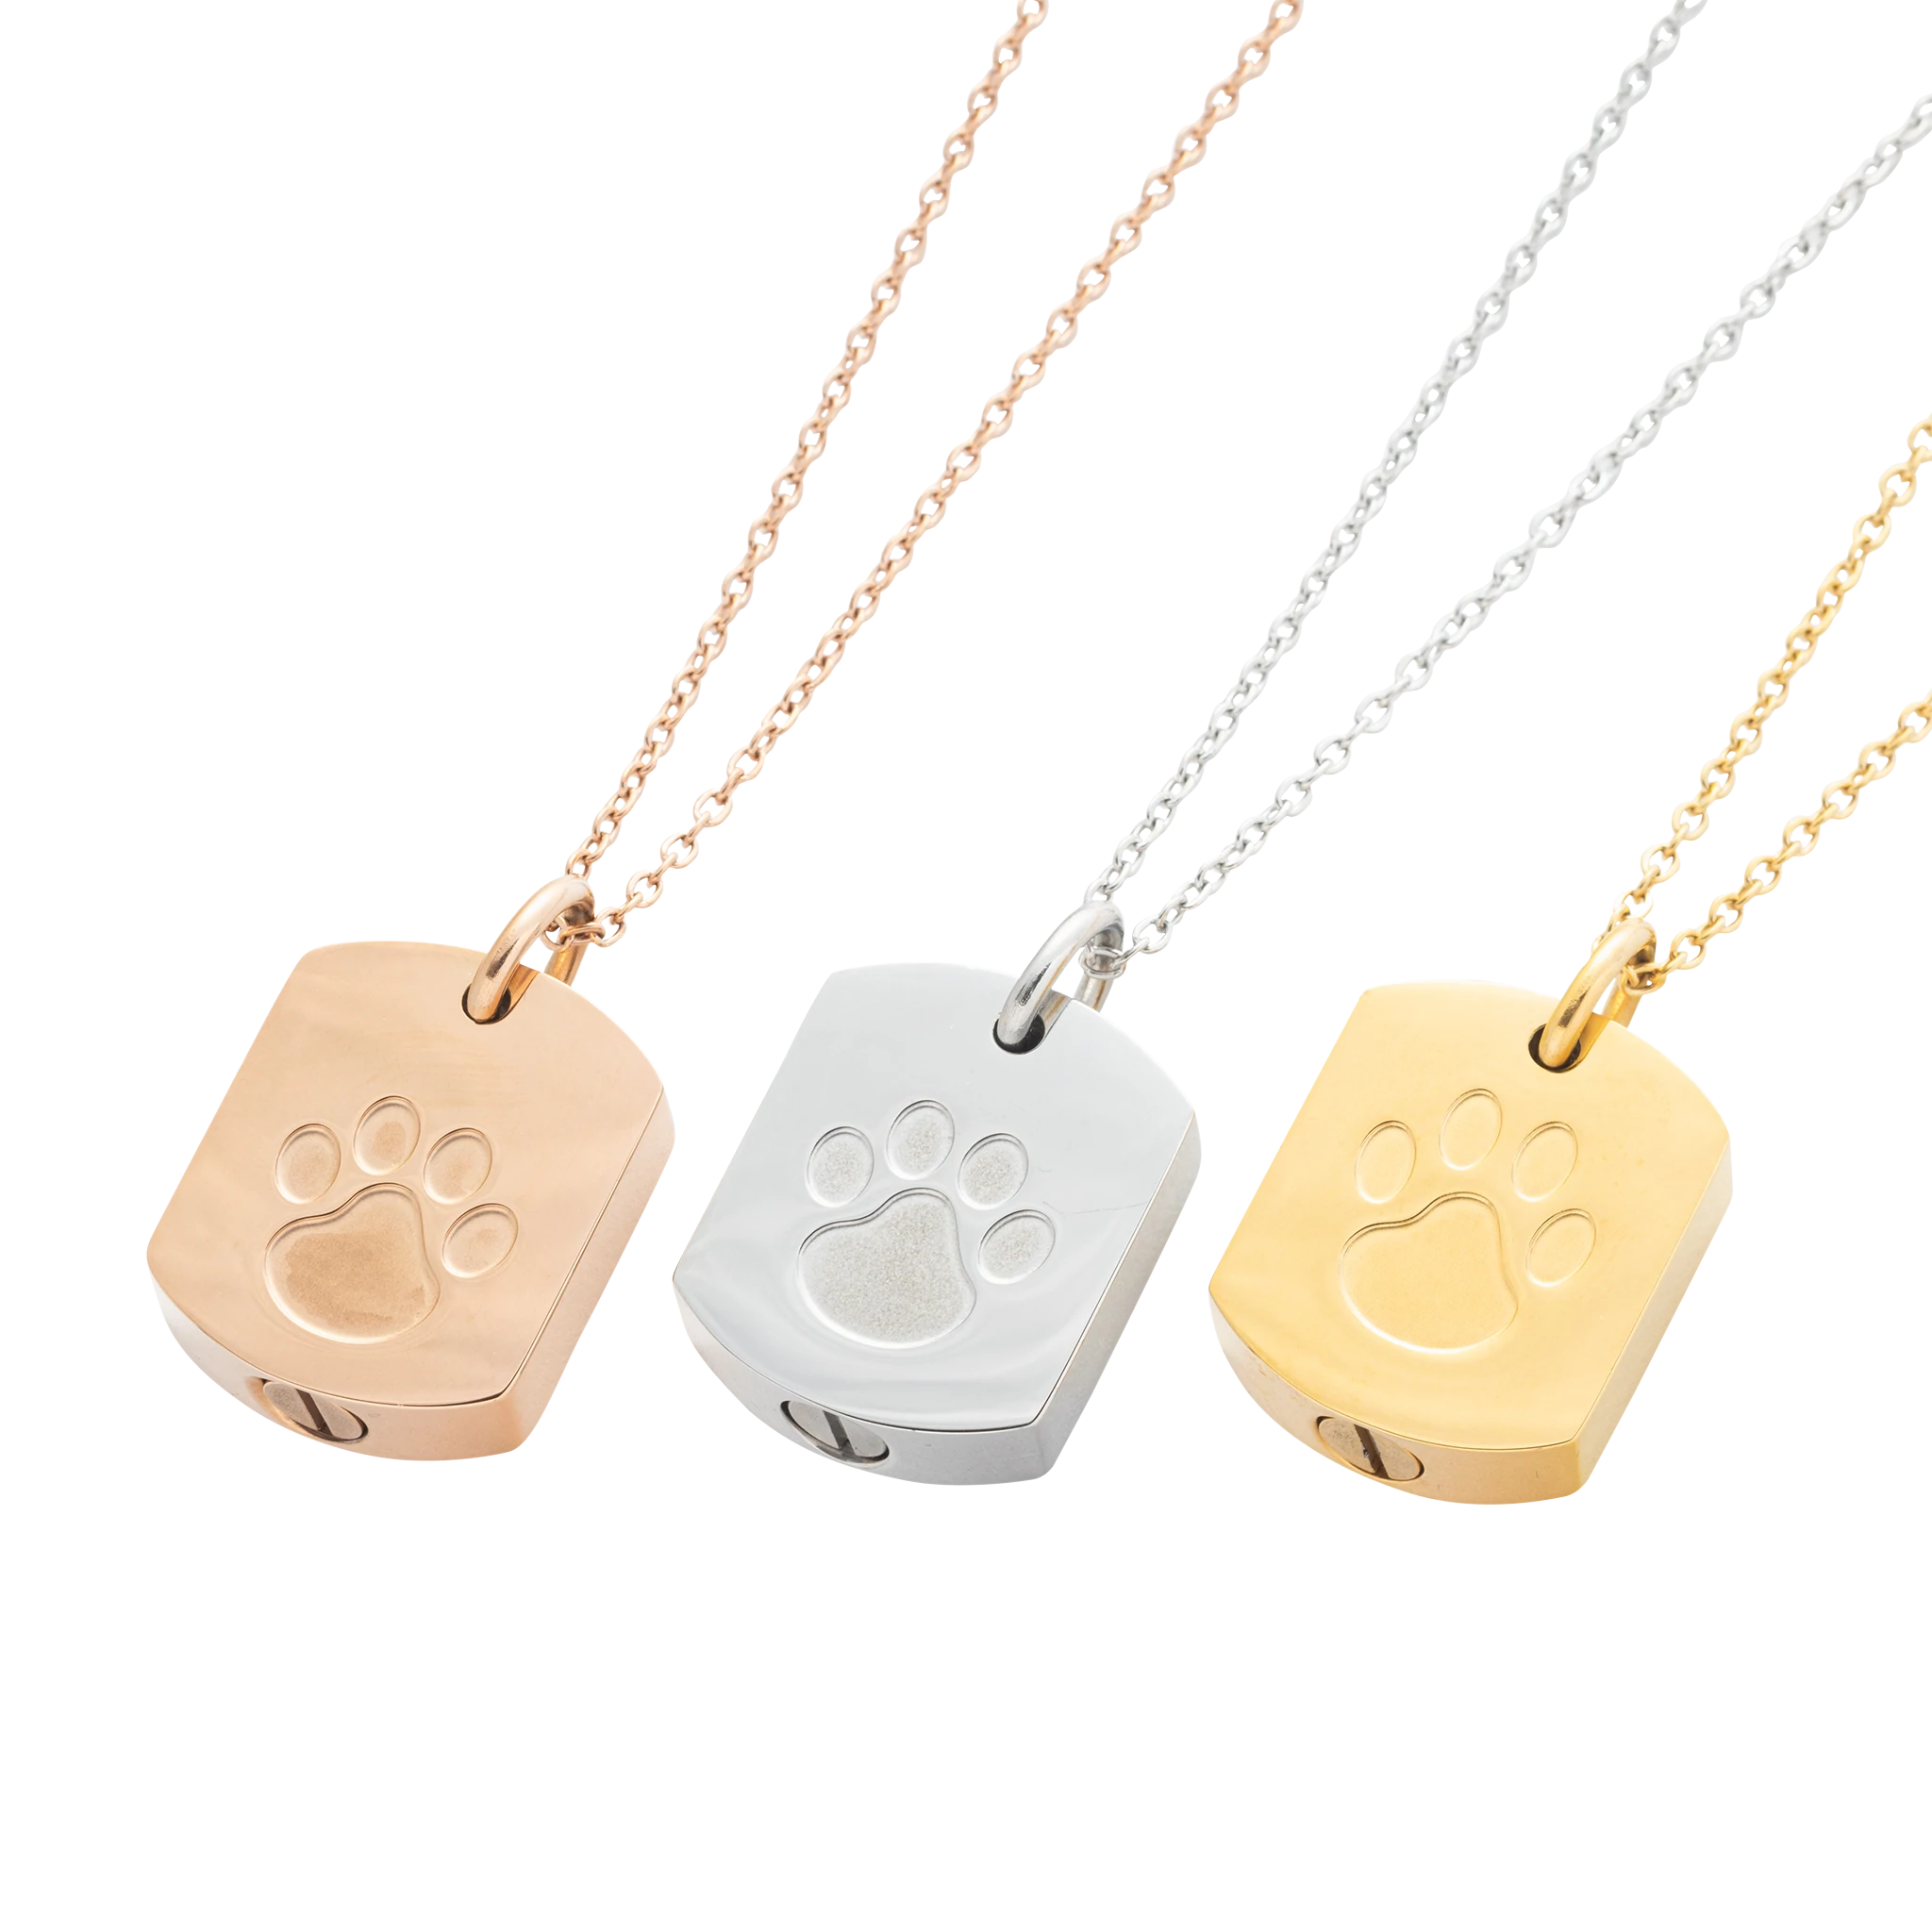 The Loyal Pet Cremation Necklace